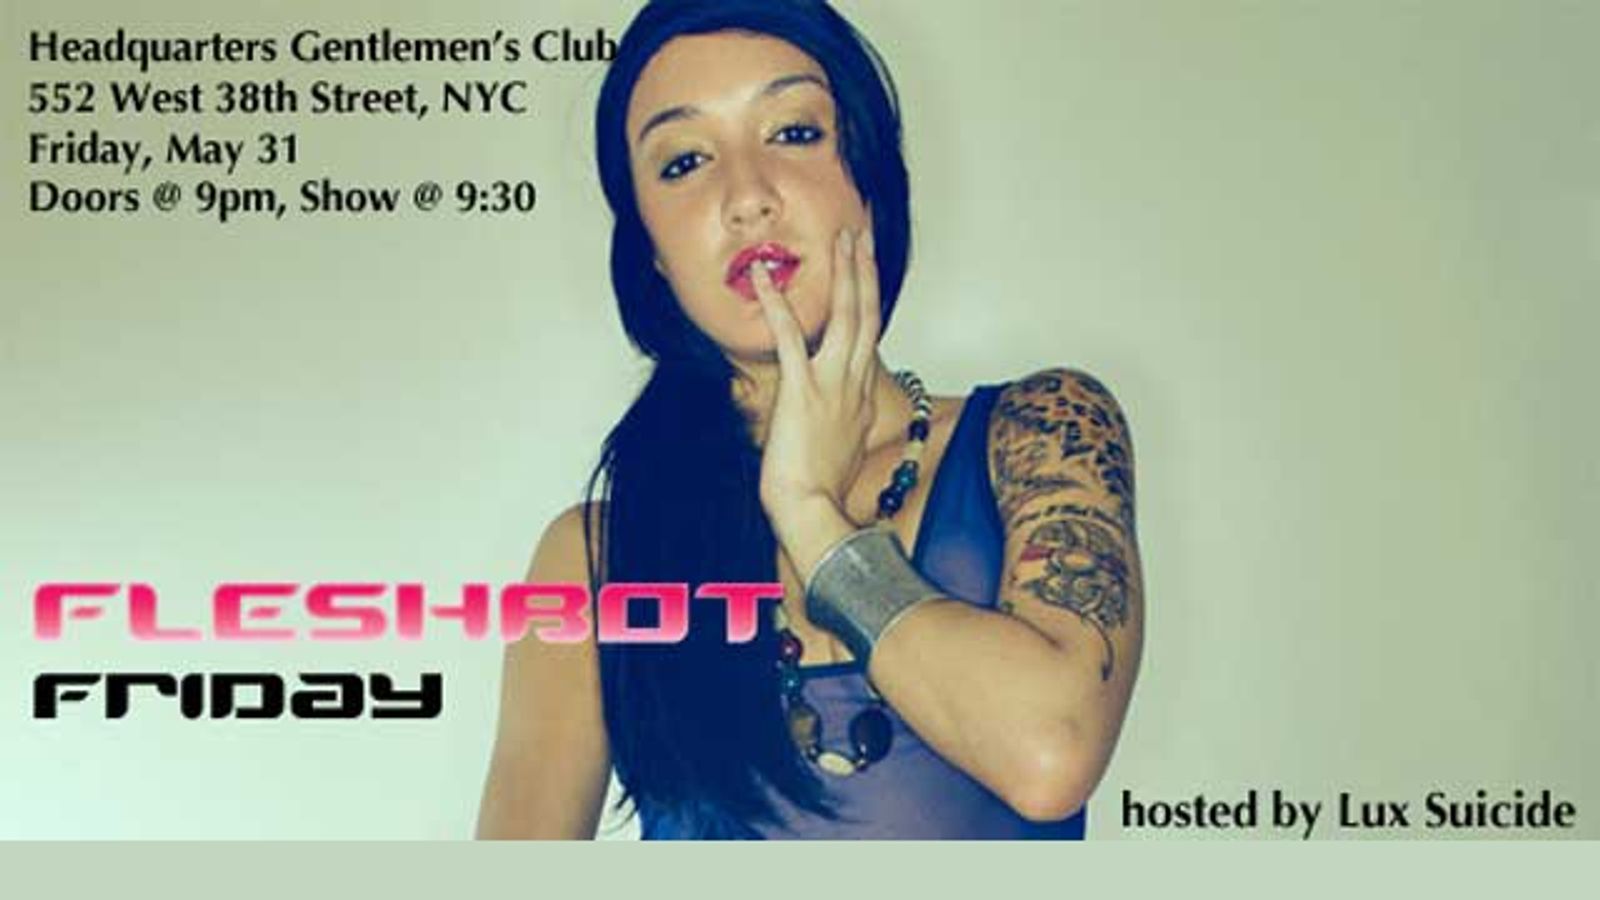 Lux Suicide Hosts Fleshbot Friday at Headquarters NY, May 31